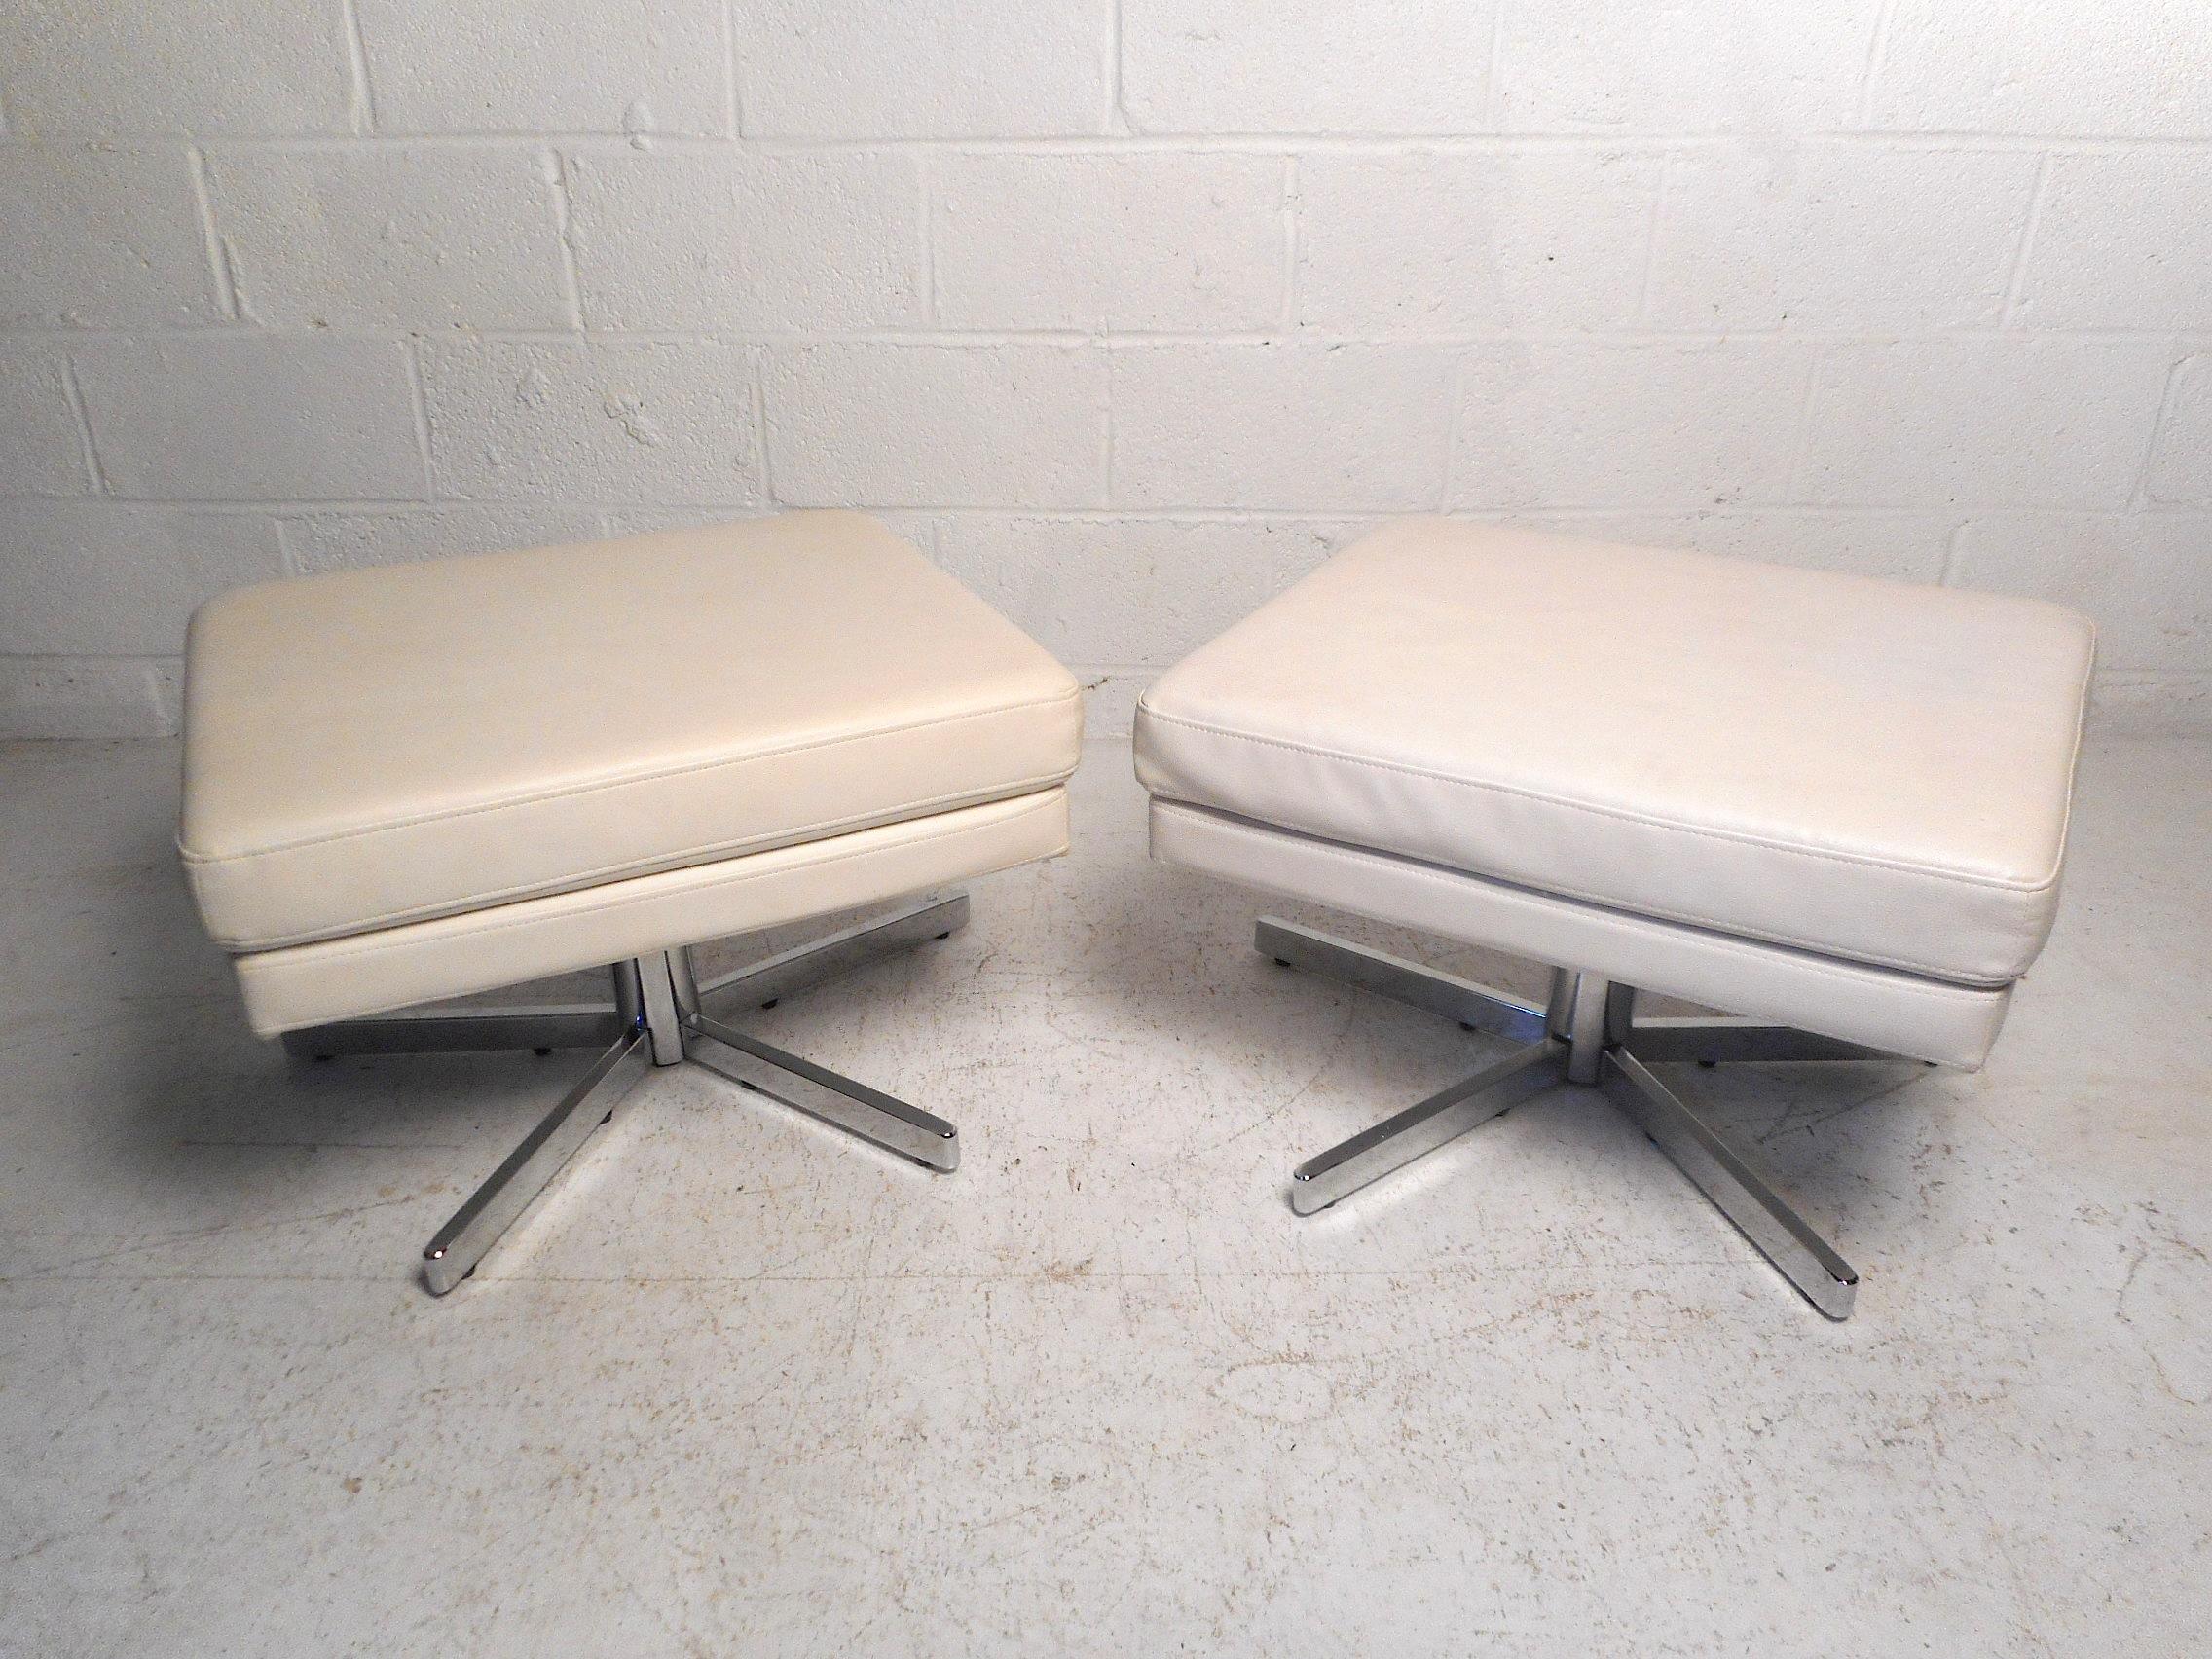 This impressive pair of midcentury ottomans feature a sleek white faux-leather upholstery, vibrant chrome swivelling bases, and comfortable soft cushioning. A distinctive midcentury set sure to please in any modern interior. Please confirm item